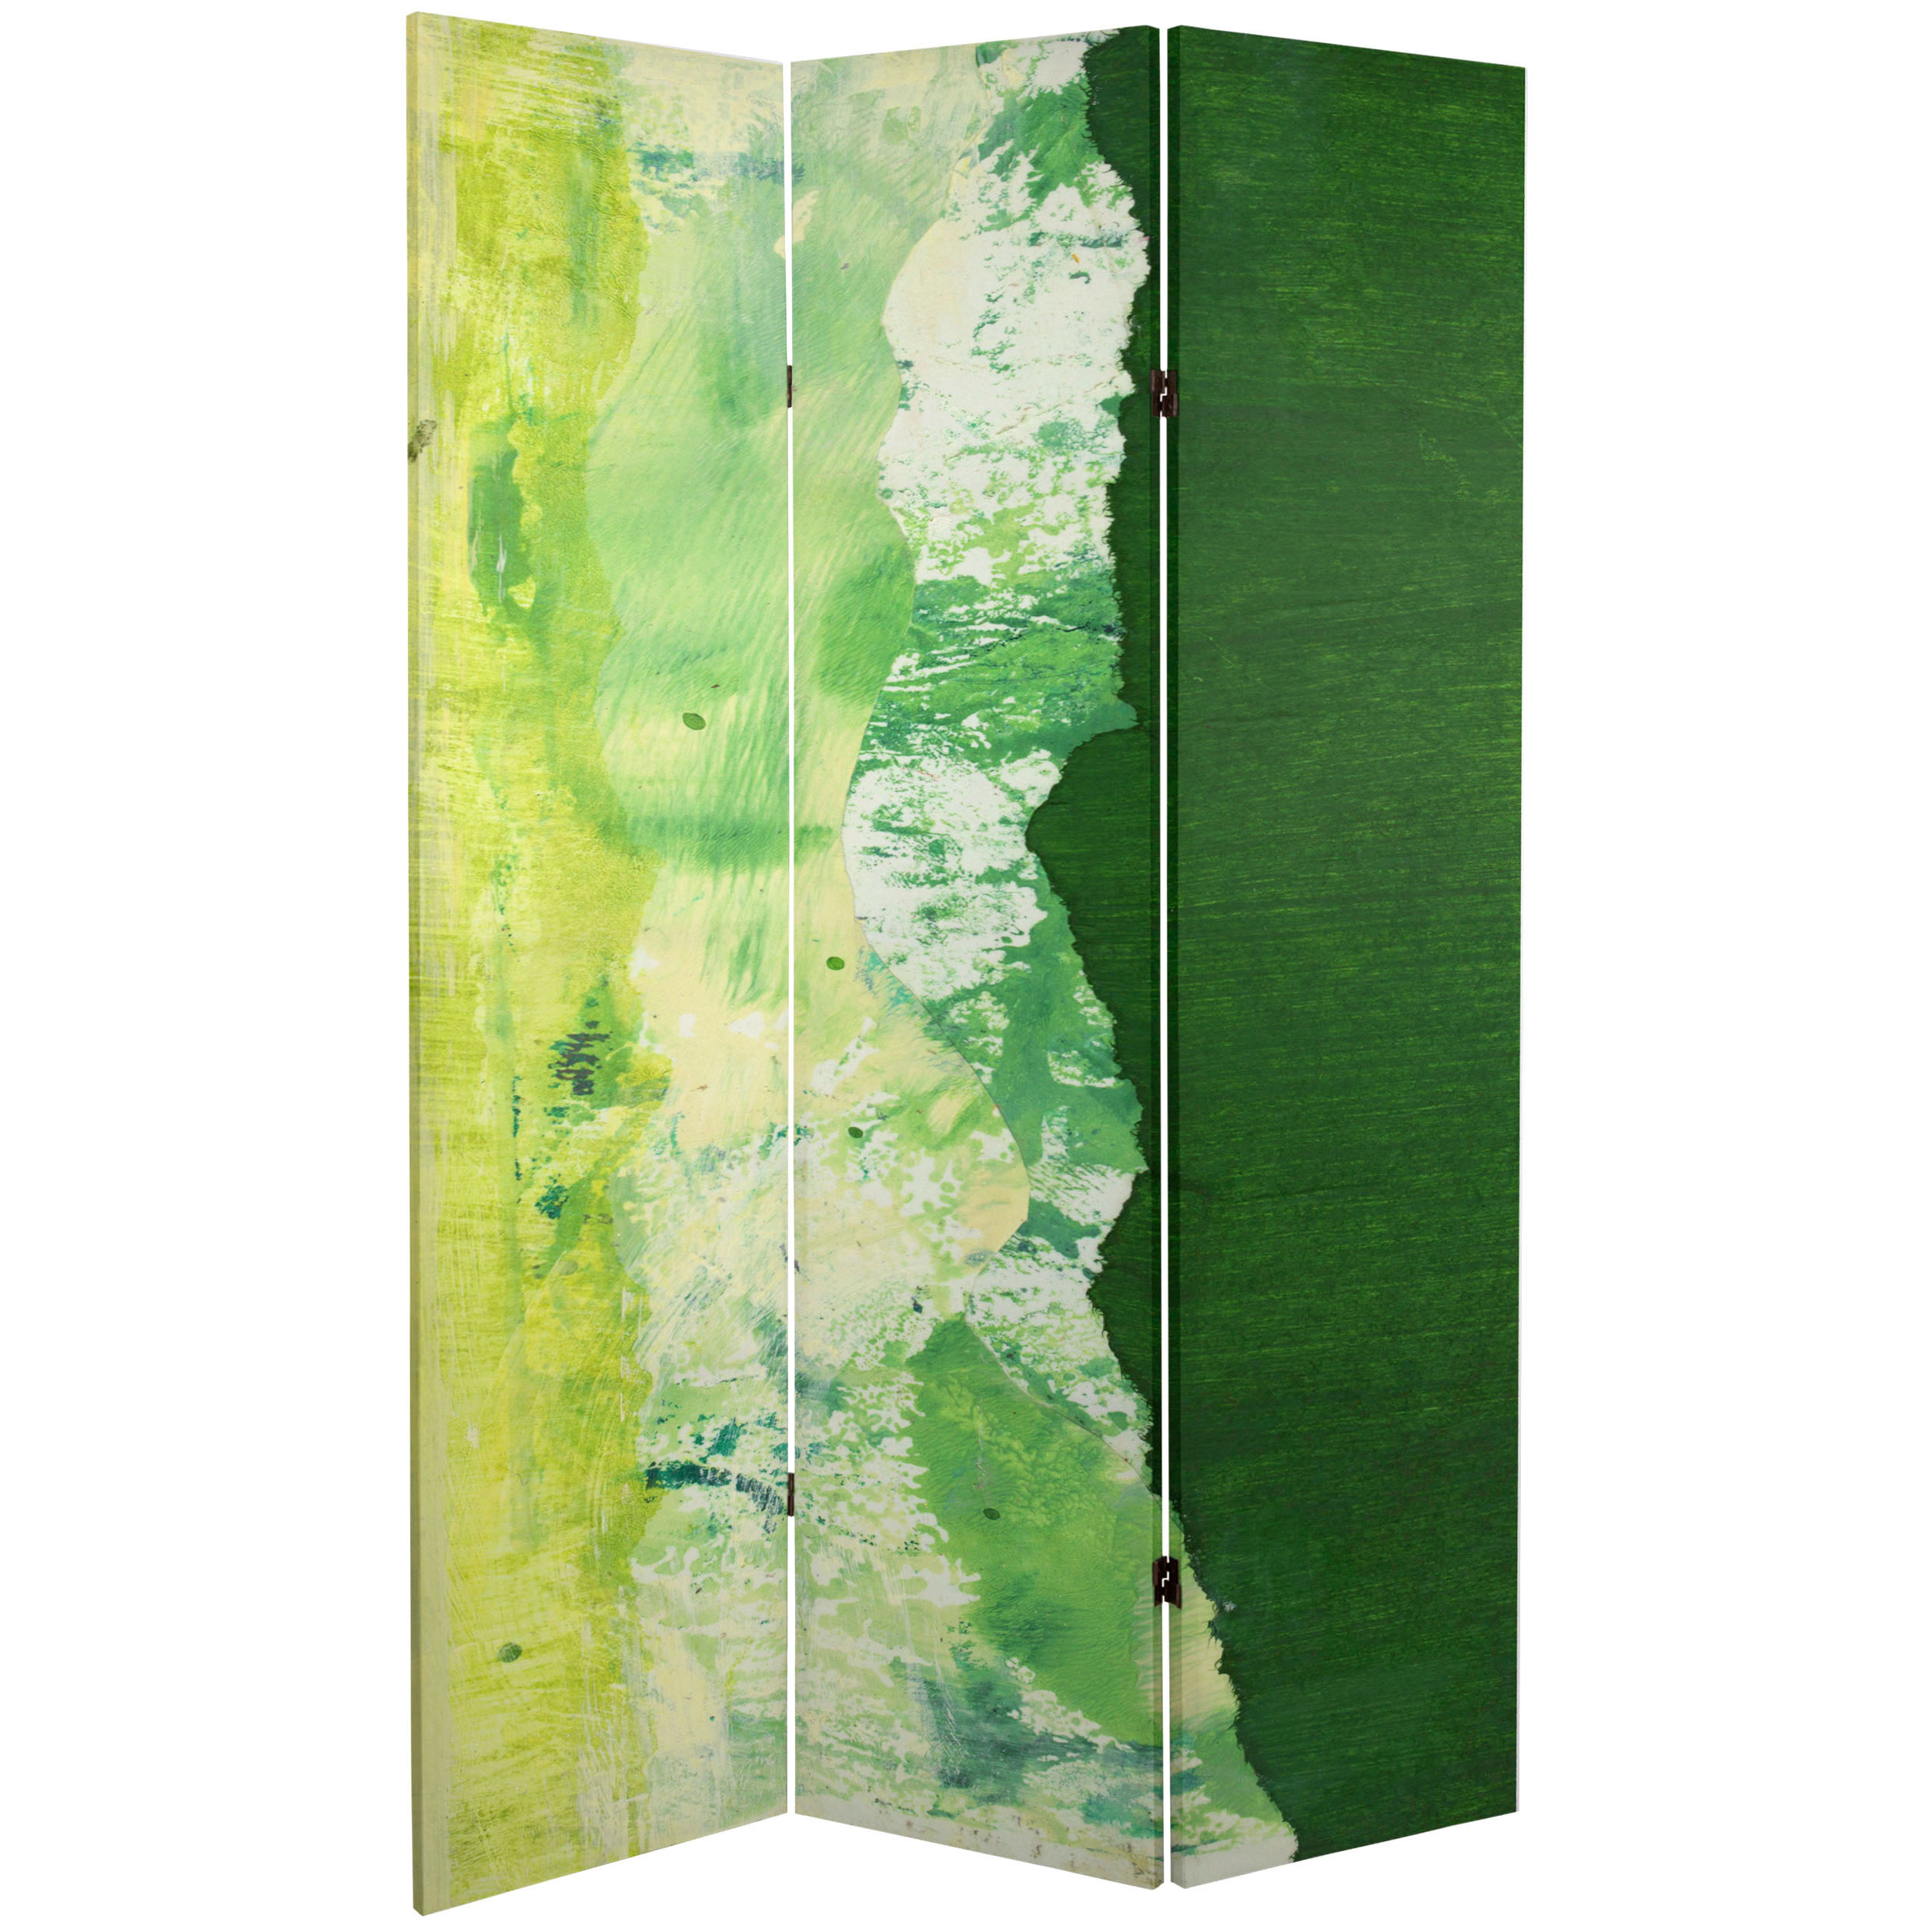 Red Lantern 6 ft. Tall Double Sided Green River Canvas Room Divider